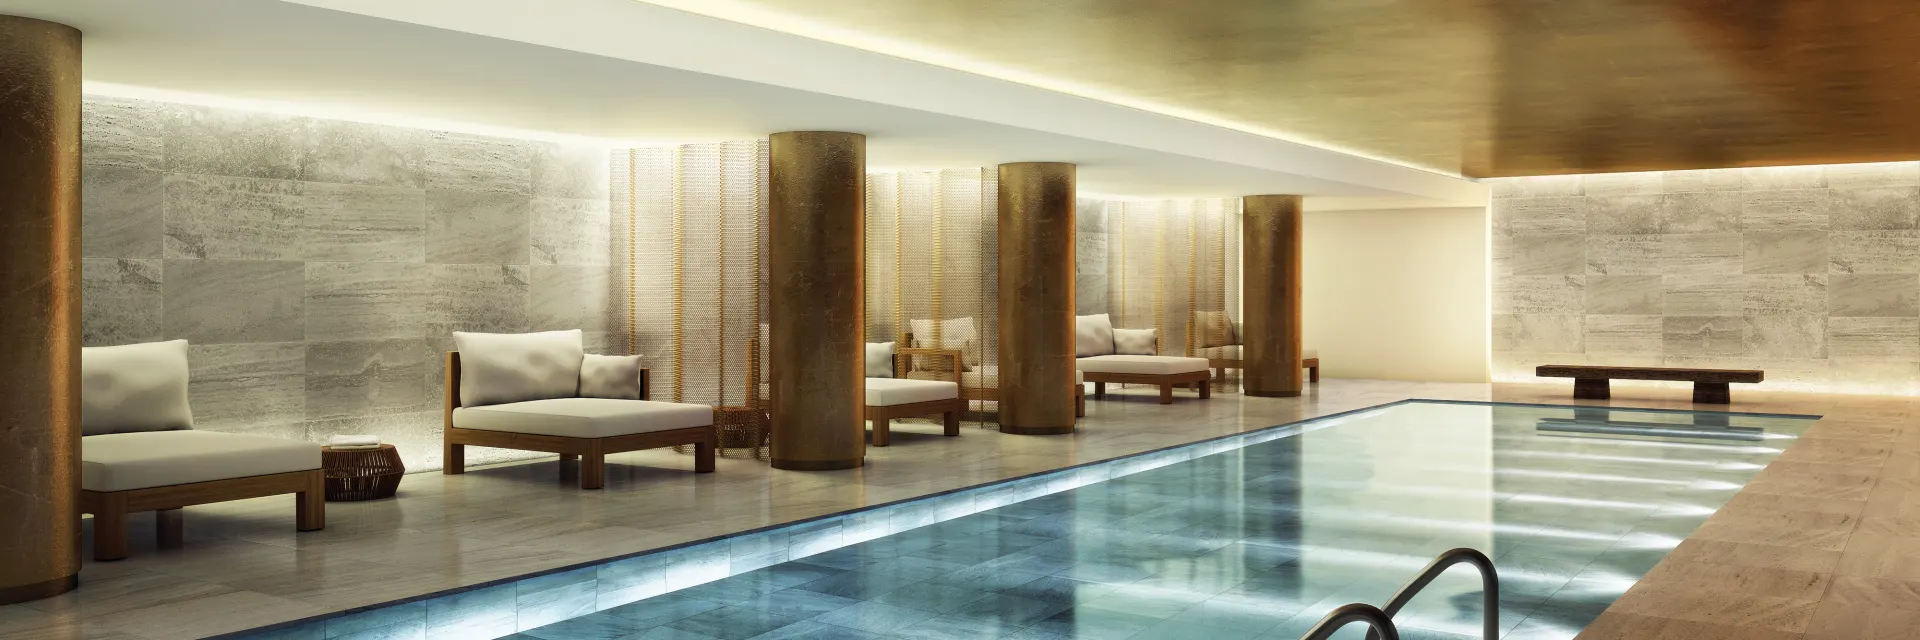 Heavenly Spa At The Westin London City